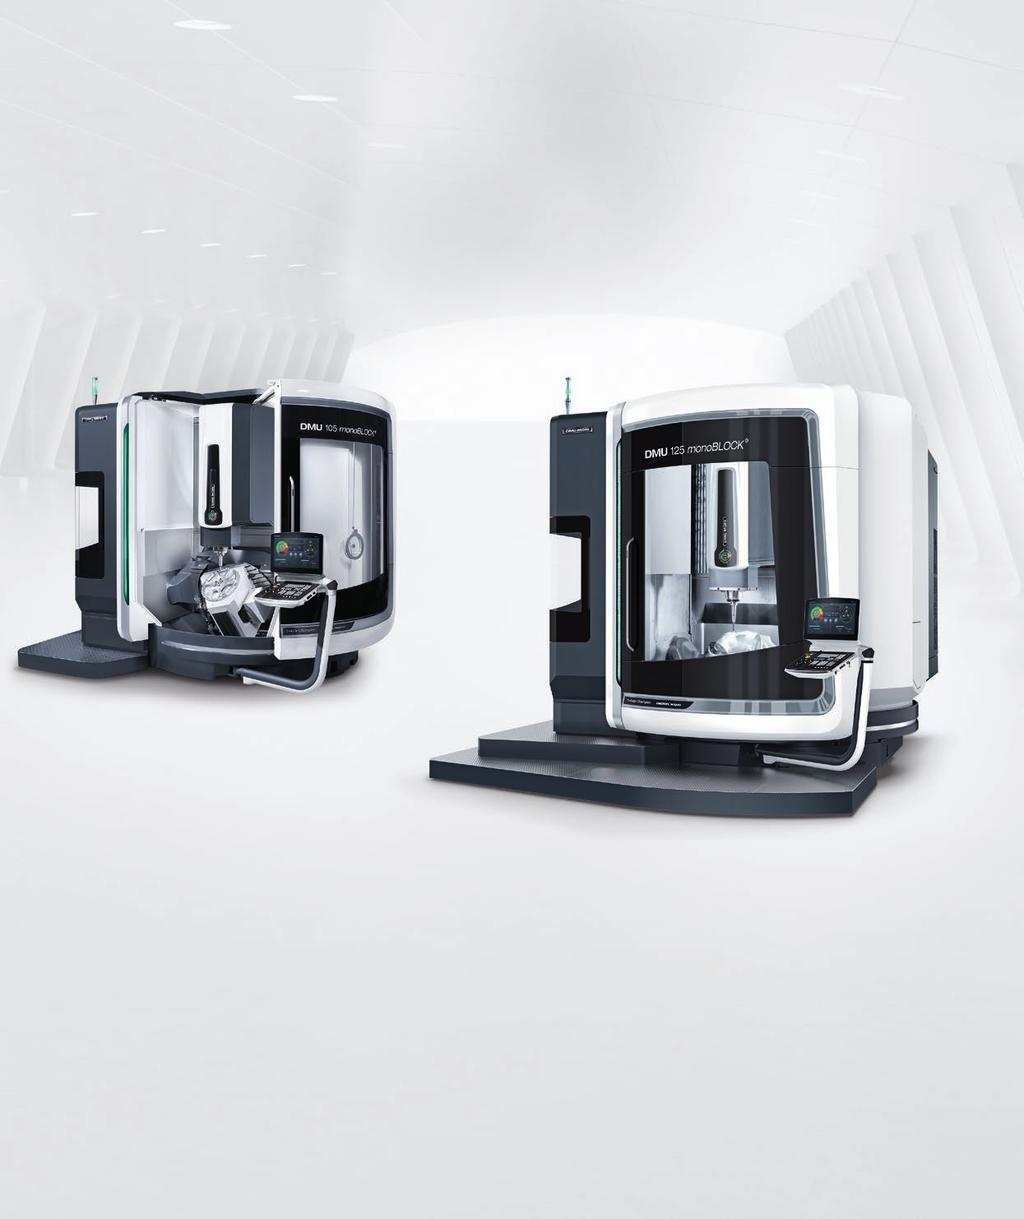 ±120 ±120 Globally unique the highest maximum load 5-axis simultaneous machining with a swivelling rotary table for components weighing up